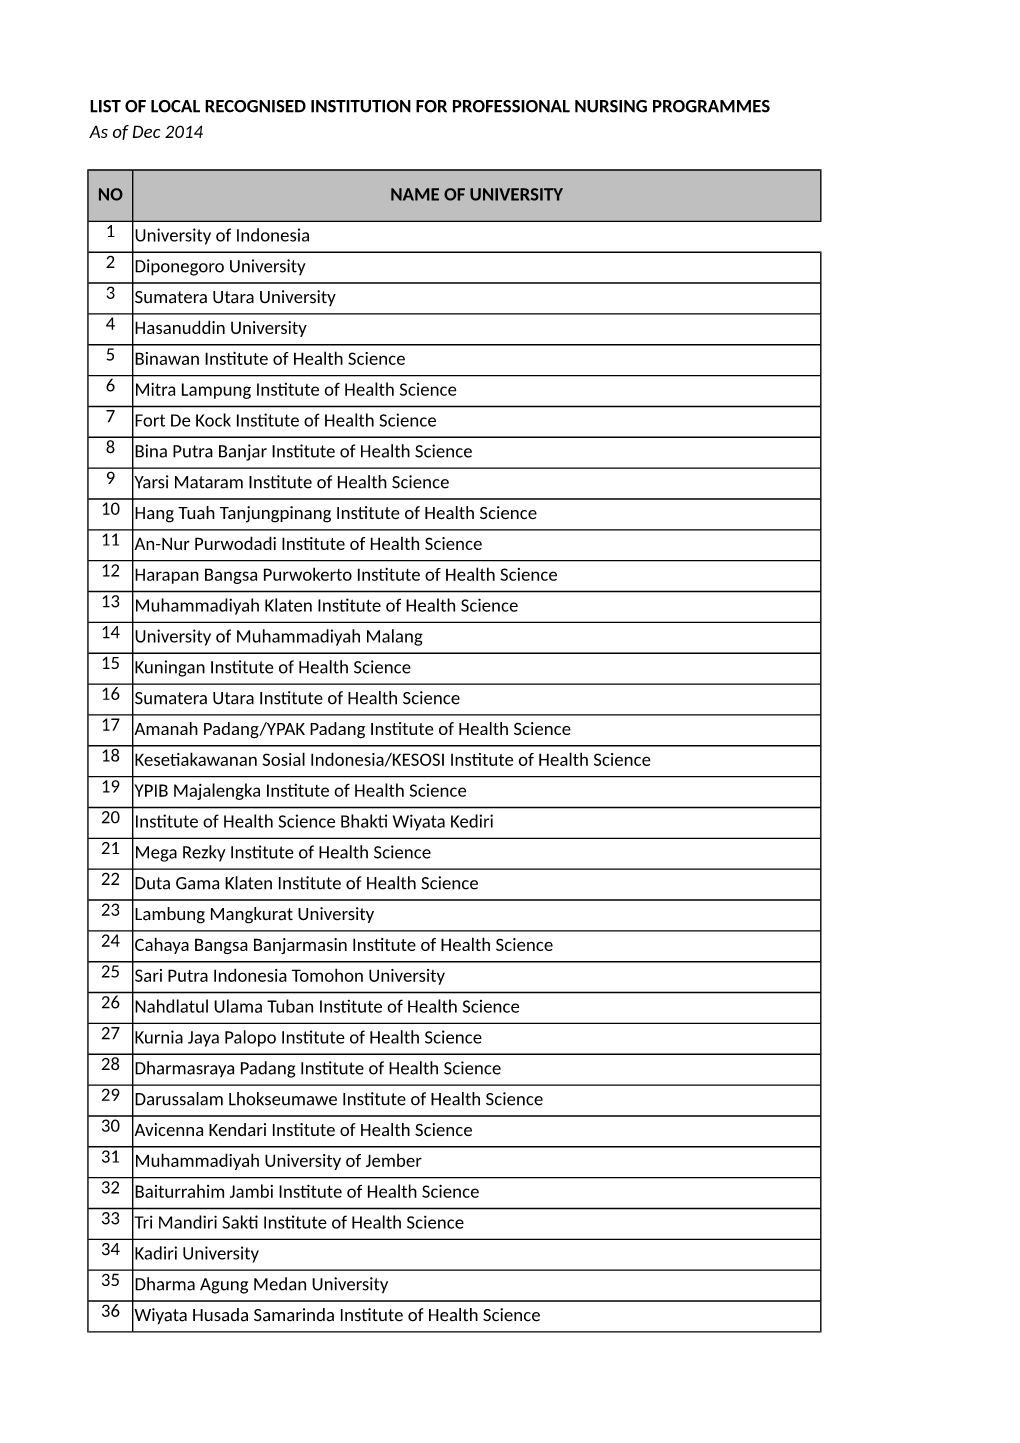 LIST of LOCAL RECOGNISED INSTITUTION for PROFESSIONAL NURSING PROGRAMMES As of Dec 2014